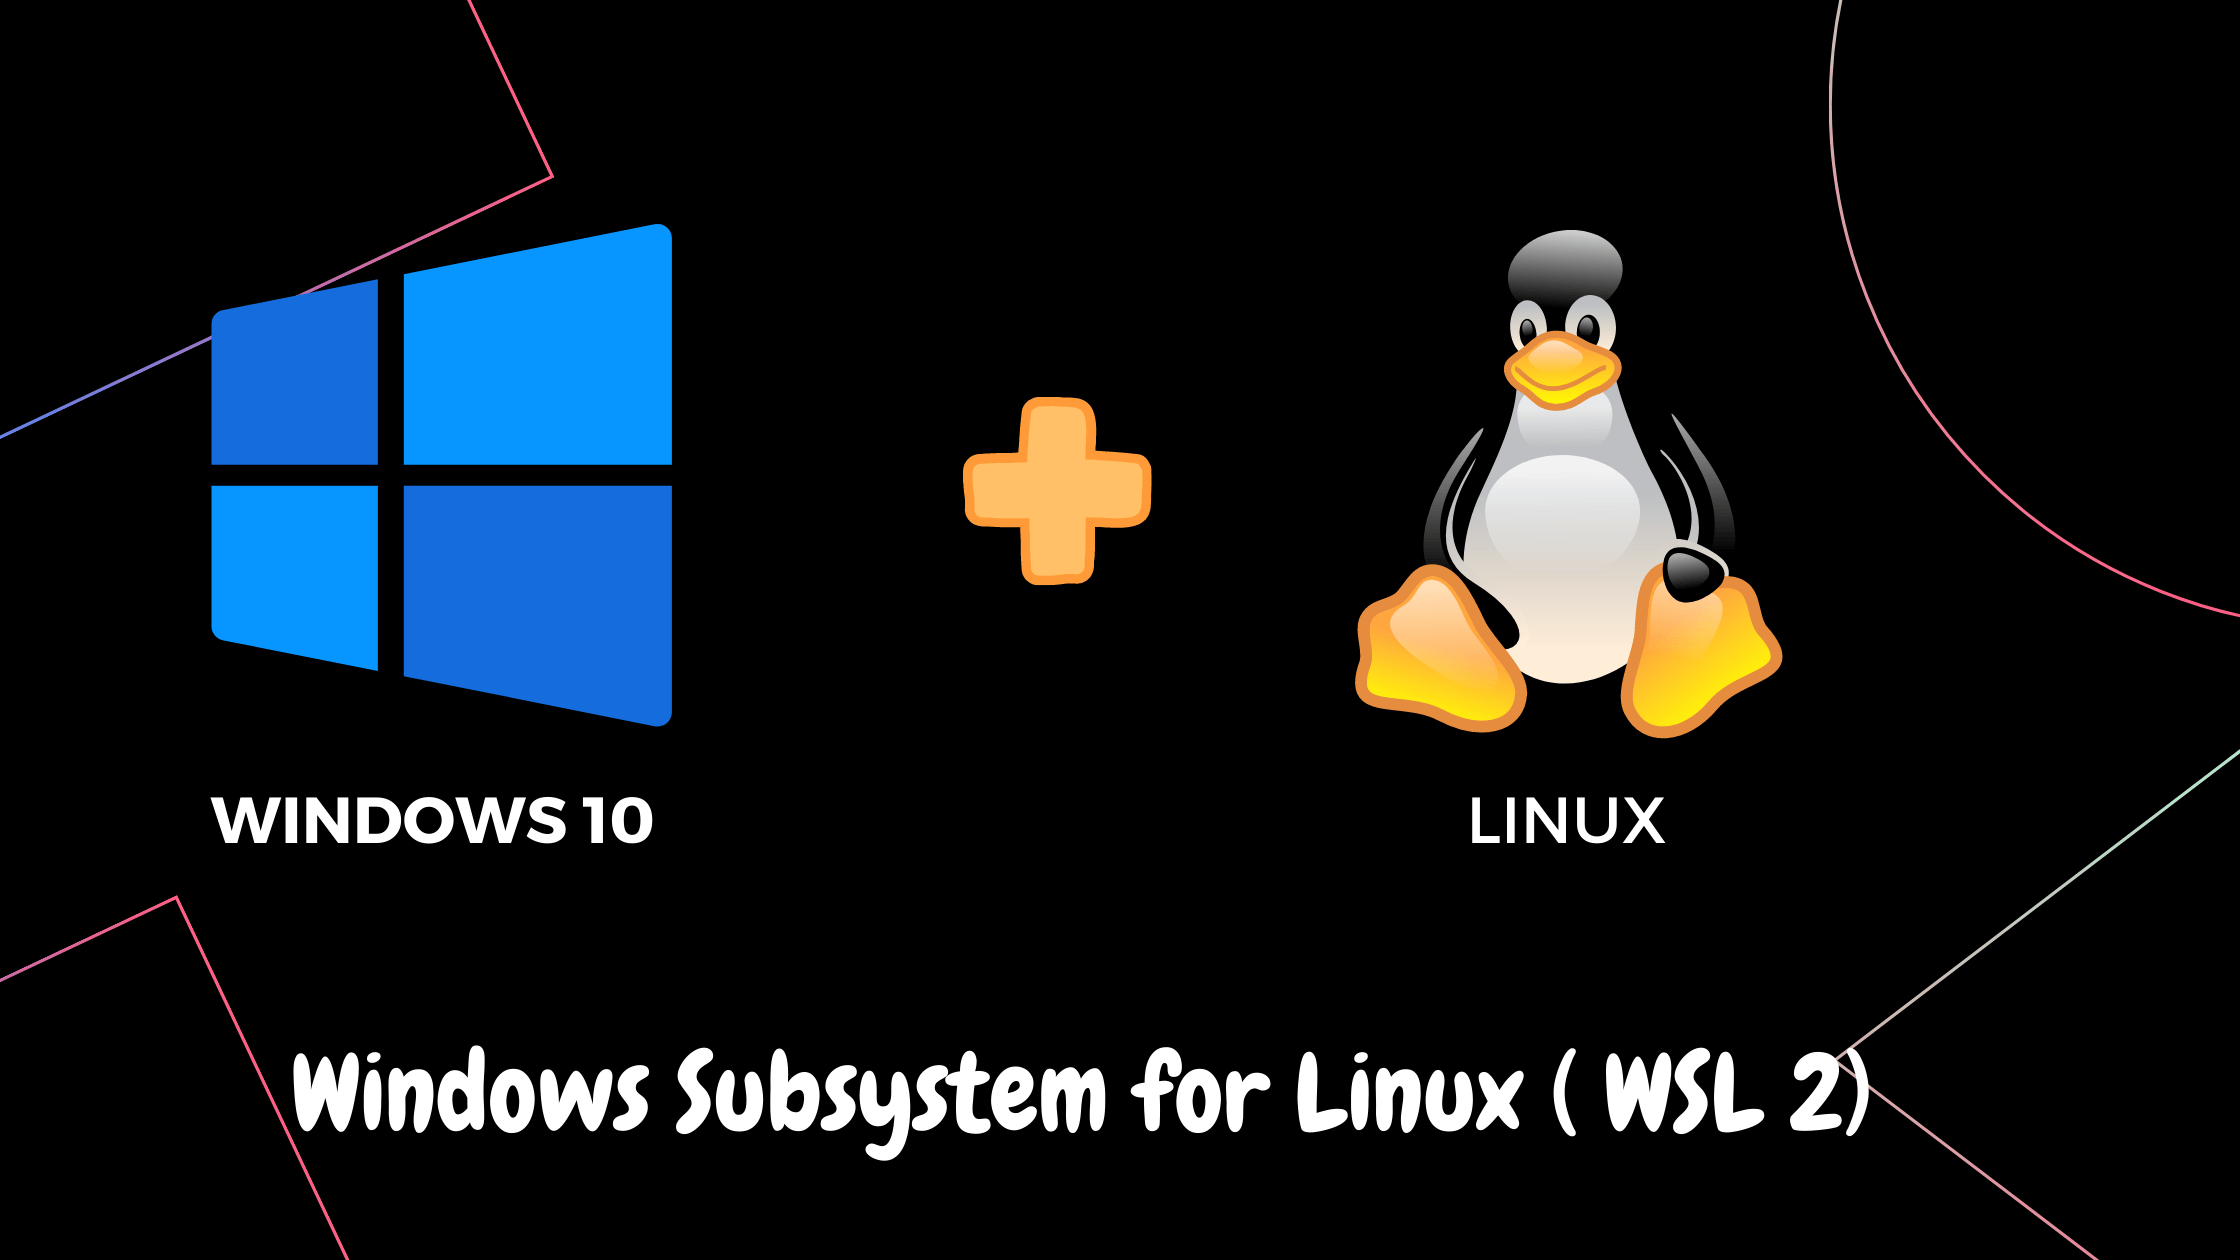 Guide-to-install-Windows-Subsystem-for-Linux-WSL-2-on-windows-10